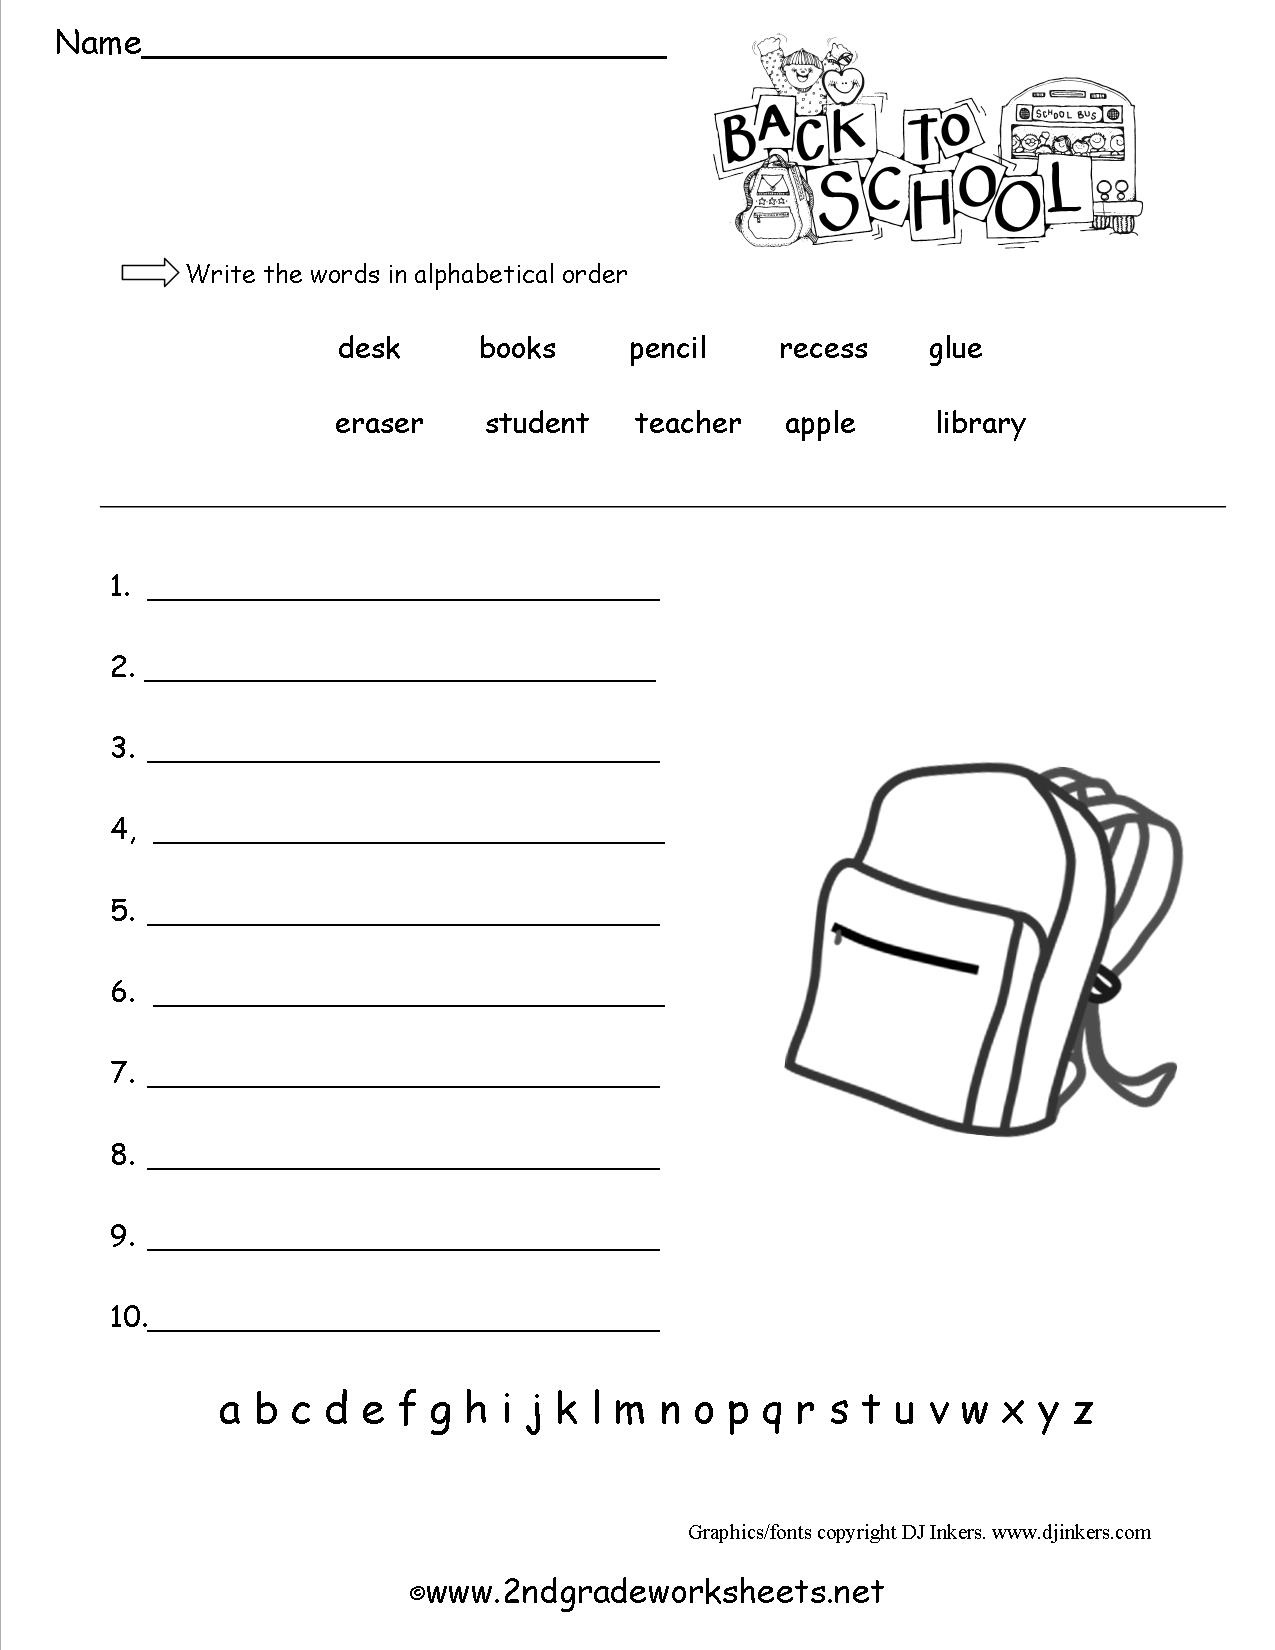 free-back-to-school-worksheets-and-printouts-free-printable-classroom